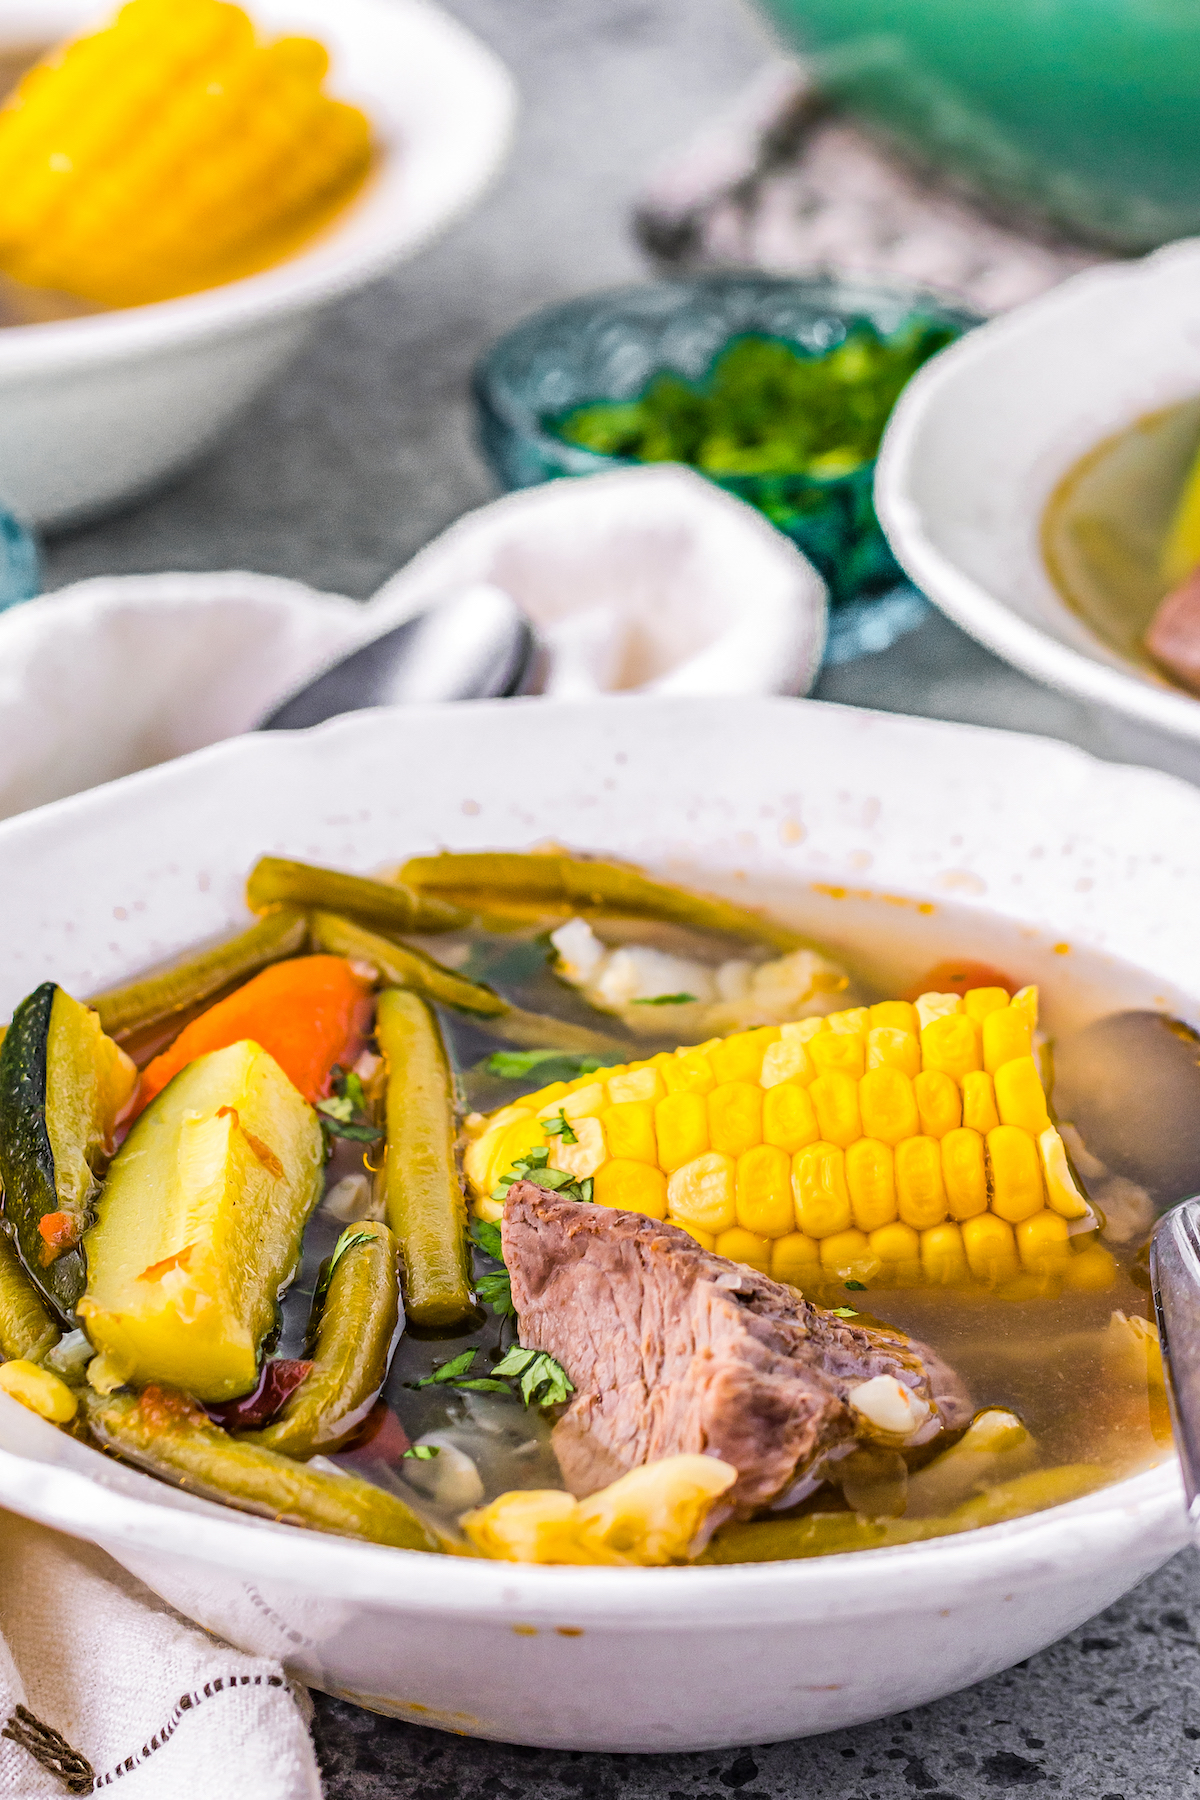 Mexican beef stew with zucchini, corn, fresh herbs, green beans, in a beef-based broth served in a grey bowl